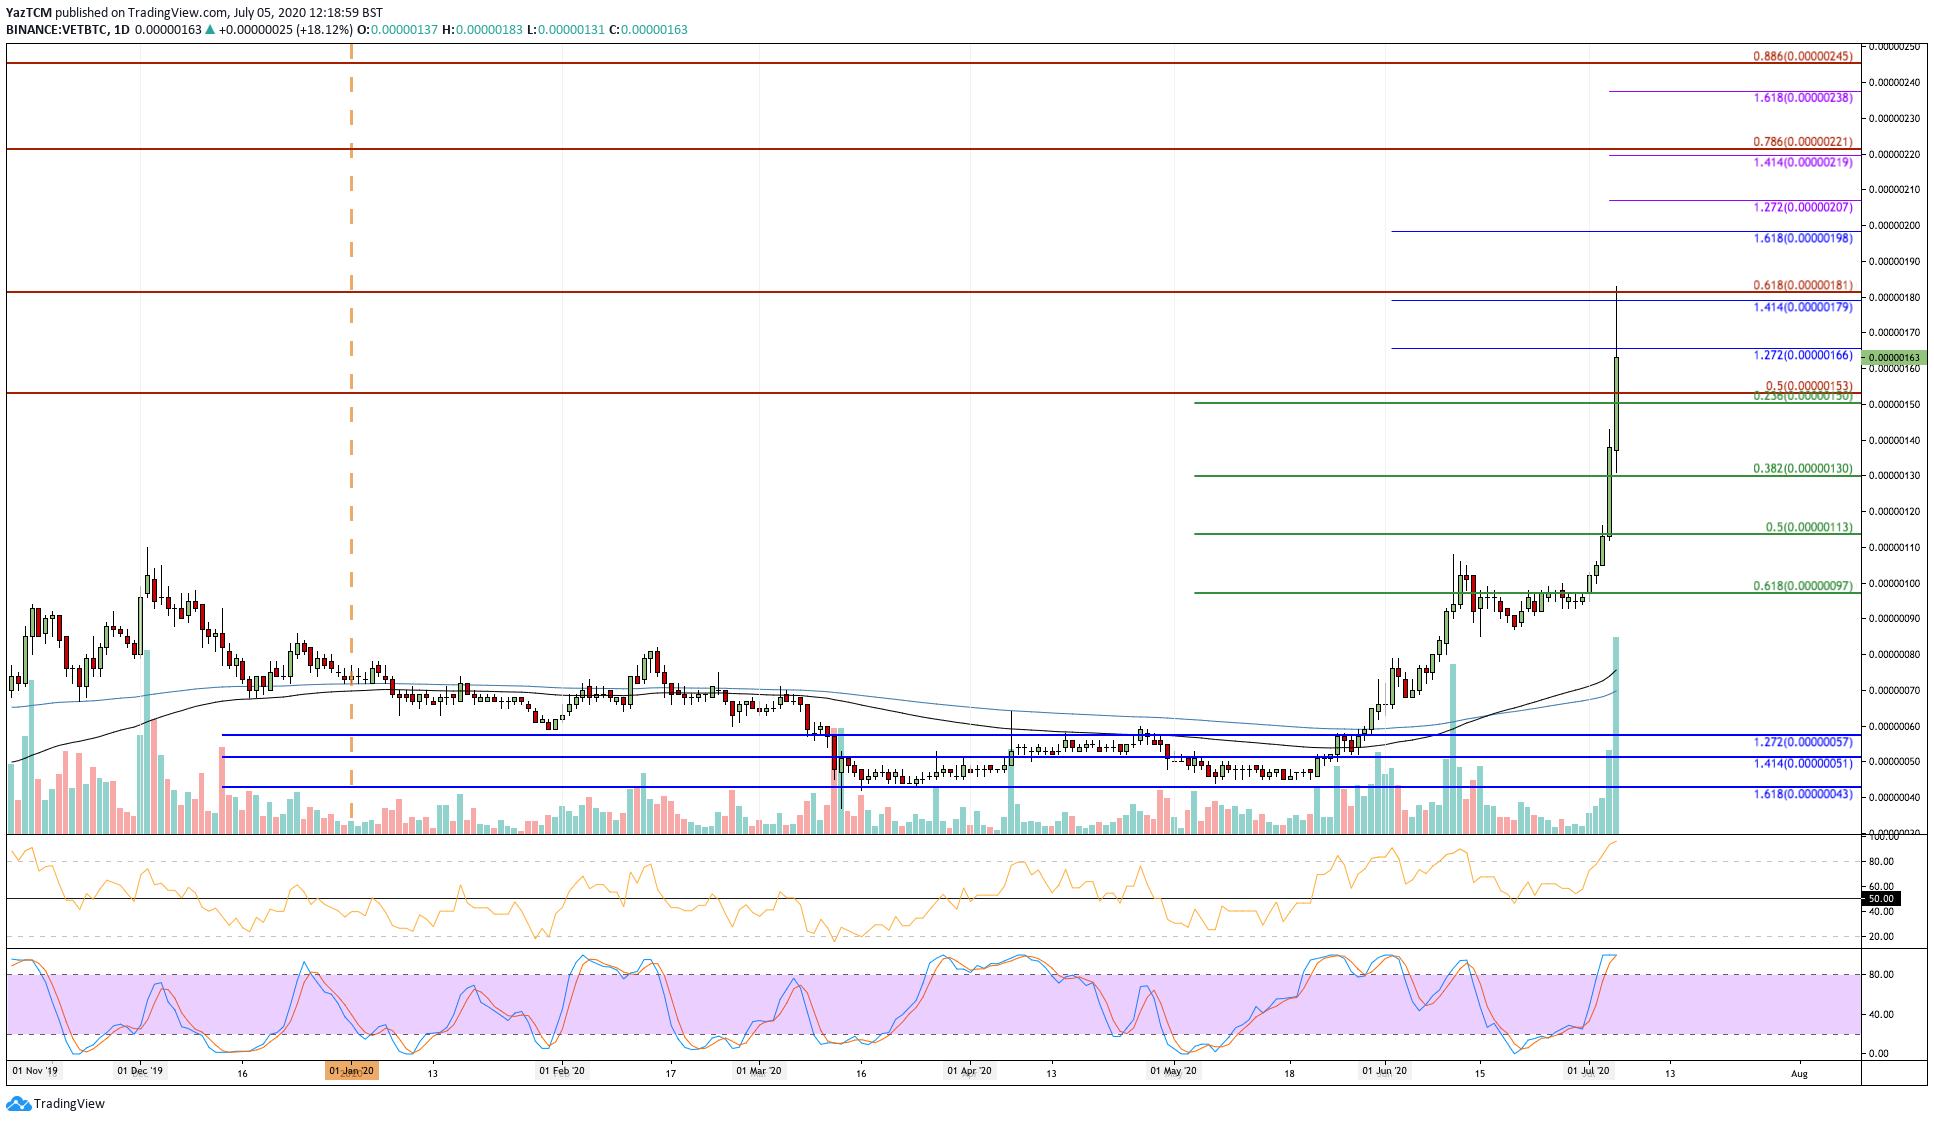 VeChain Price Analysis: Sky is The Limit as VET Charts 65% Gains in 7 Days